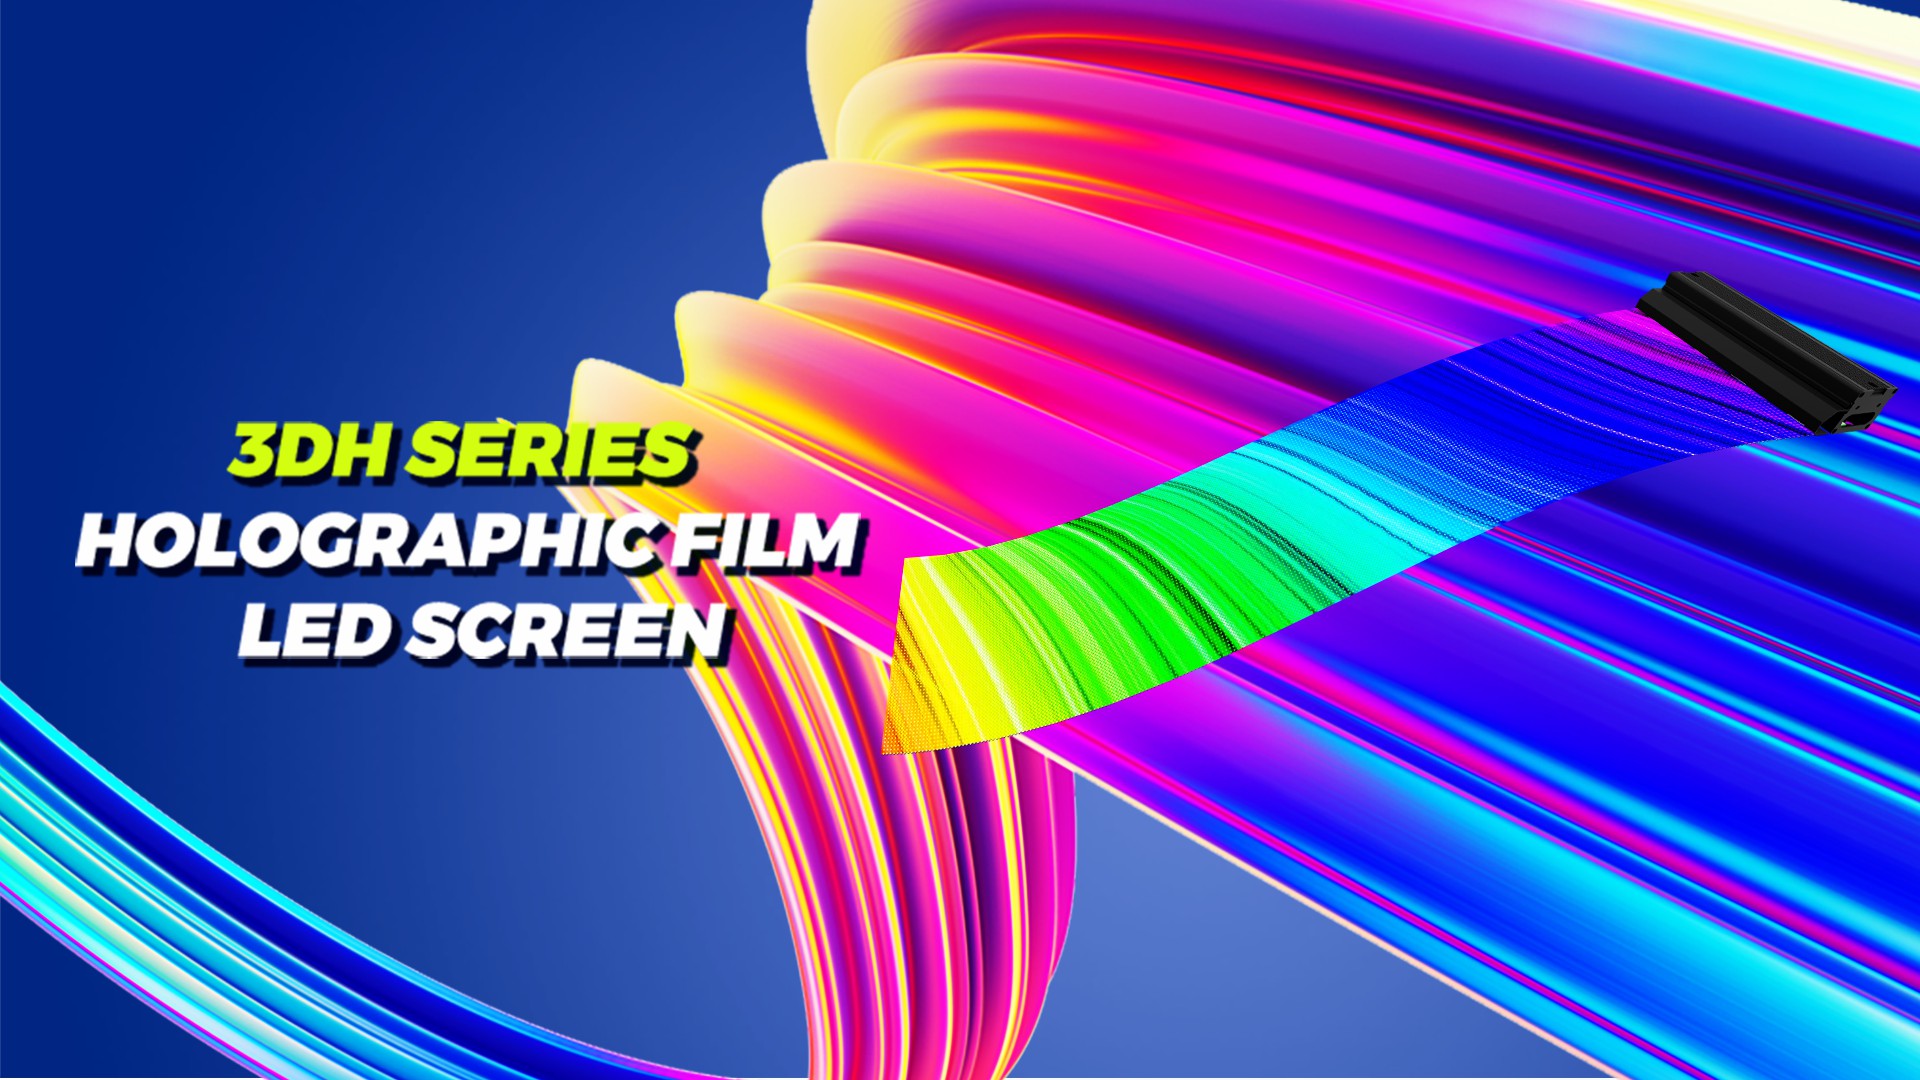 3DH series Holographic film LED screen